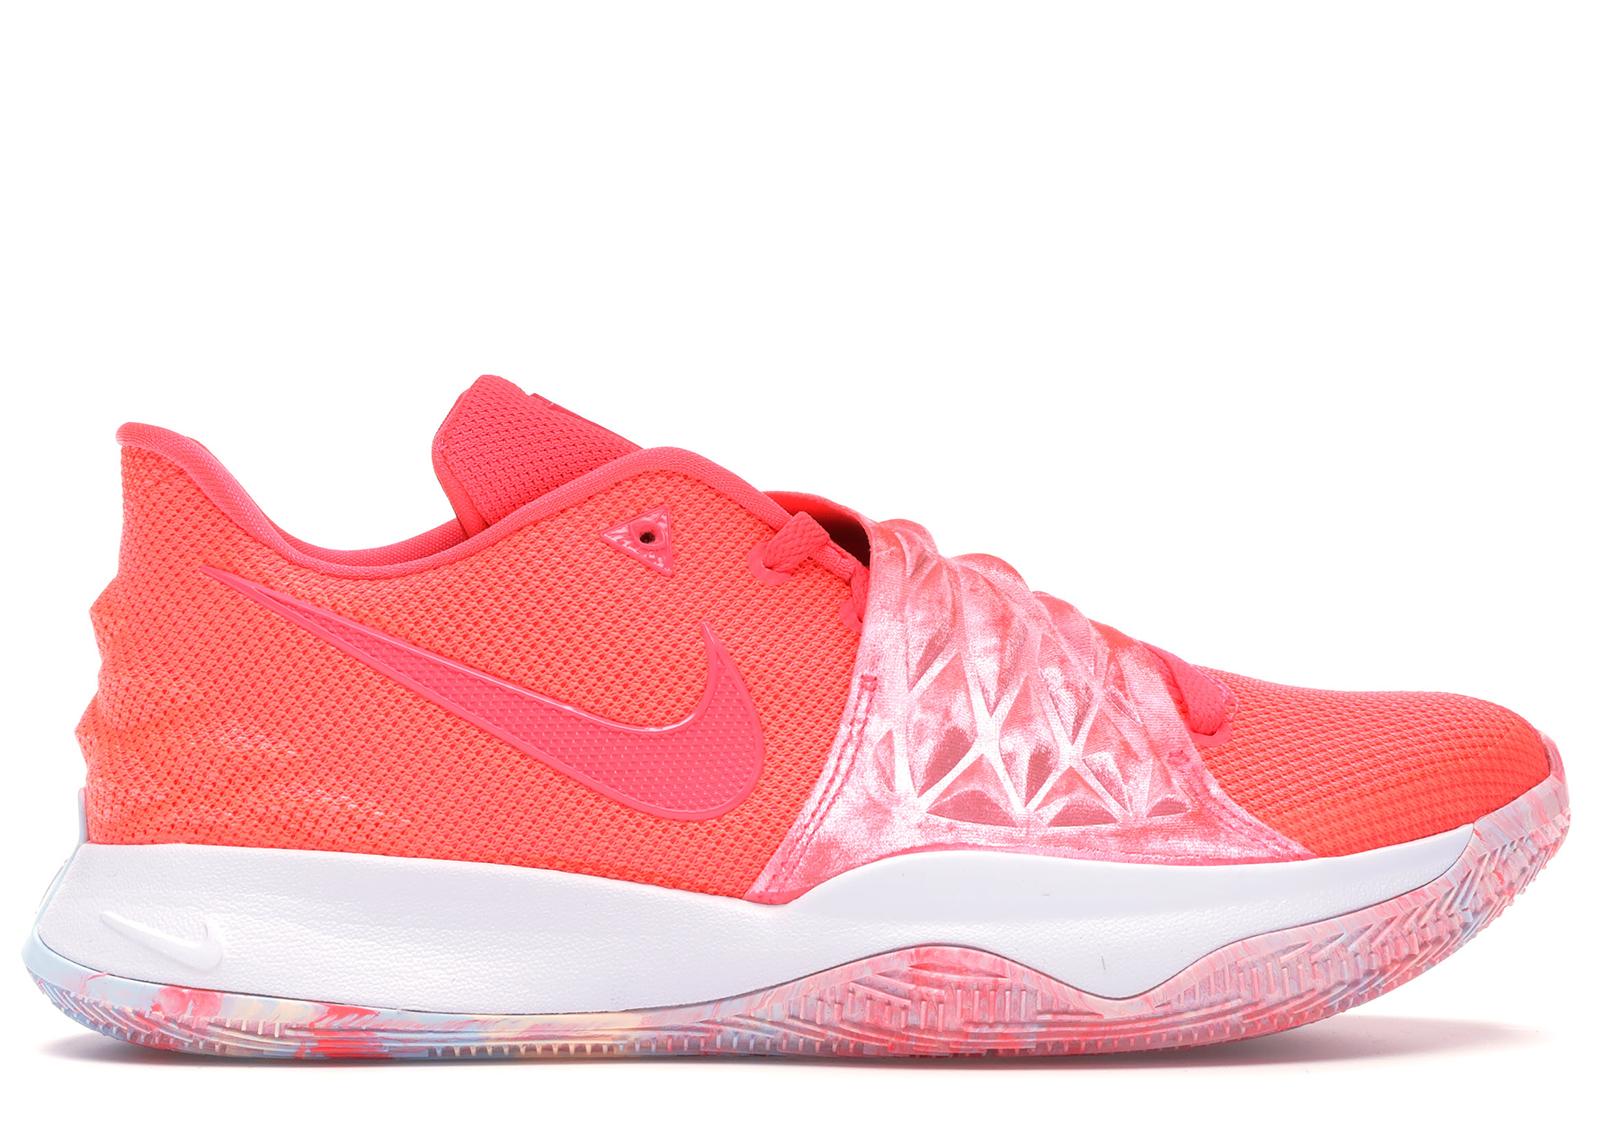 Nike Kyrie Low 1 Hot Punch in Pink for 